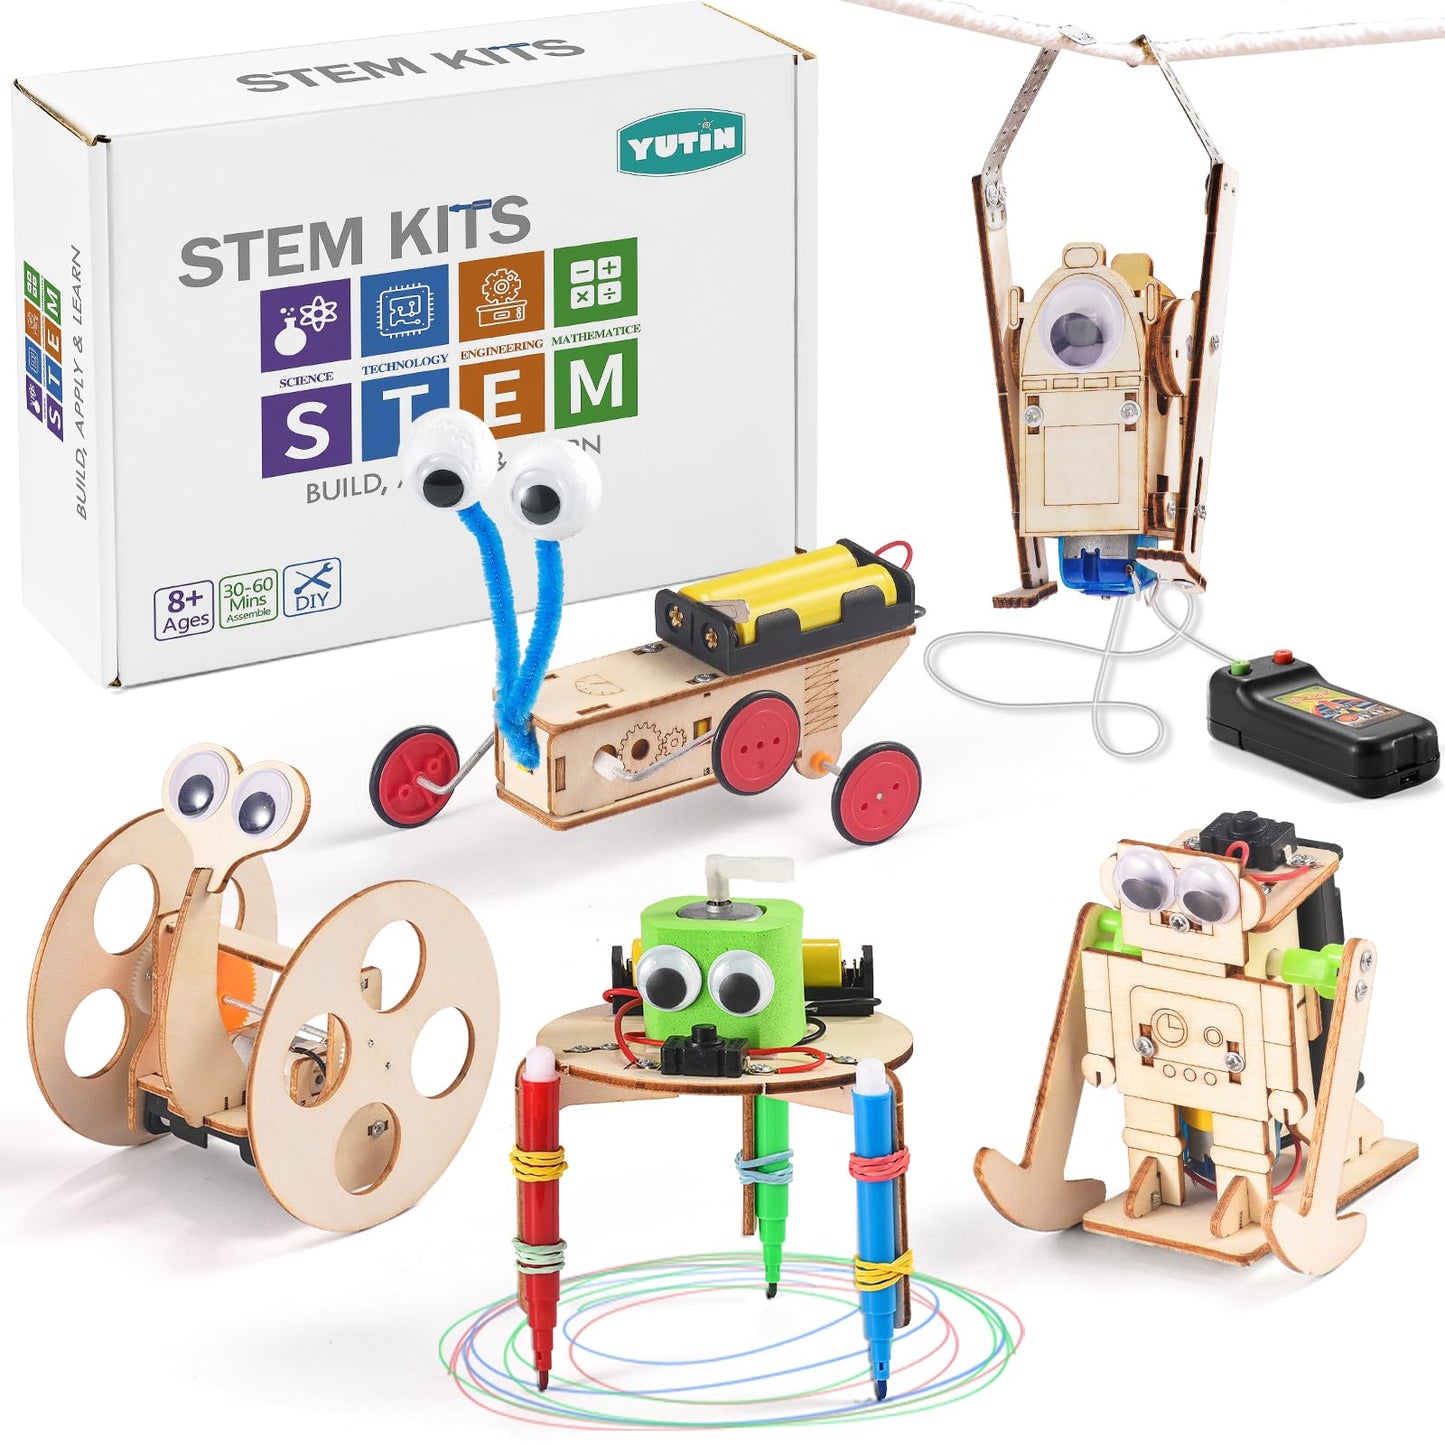 STEM Kits for Kids Ages 8-10-12, Robot Building Crafts Kit for Boys Age 6-8, Wood Science Projects, 3D Wooden Puzzles, Woodworking Model Christmas Toys for 5 6 7 8 9 10 11 12+